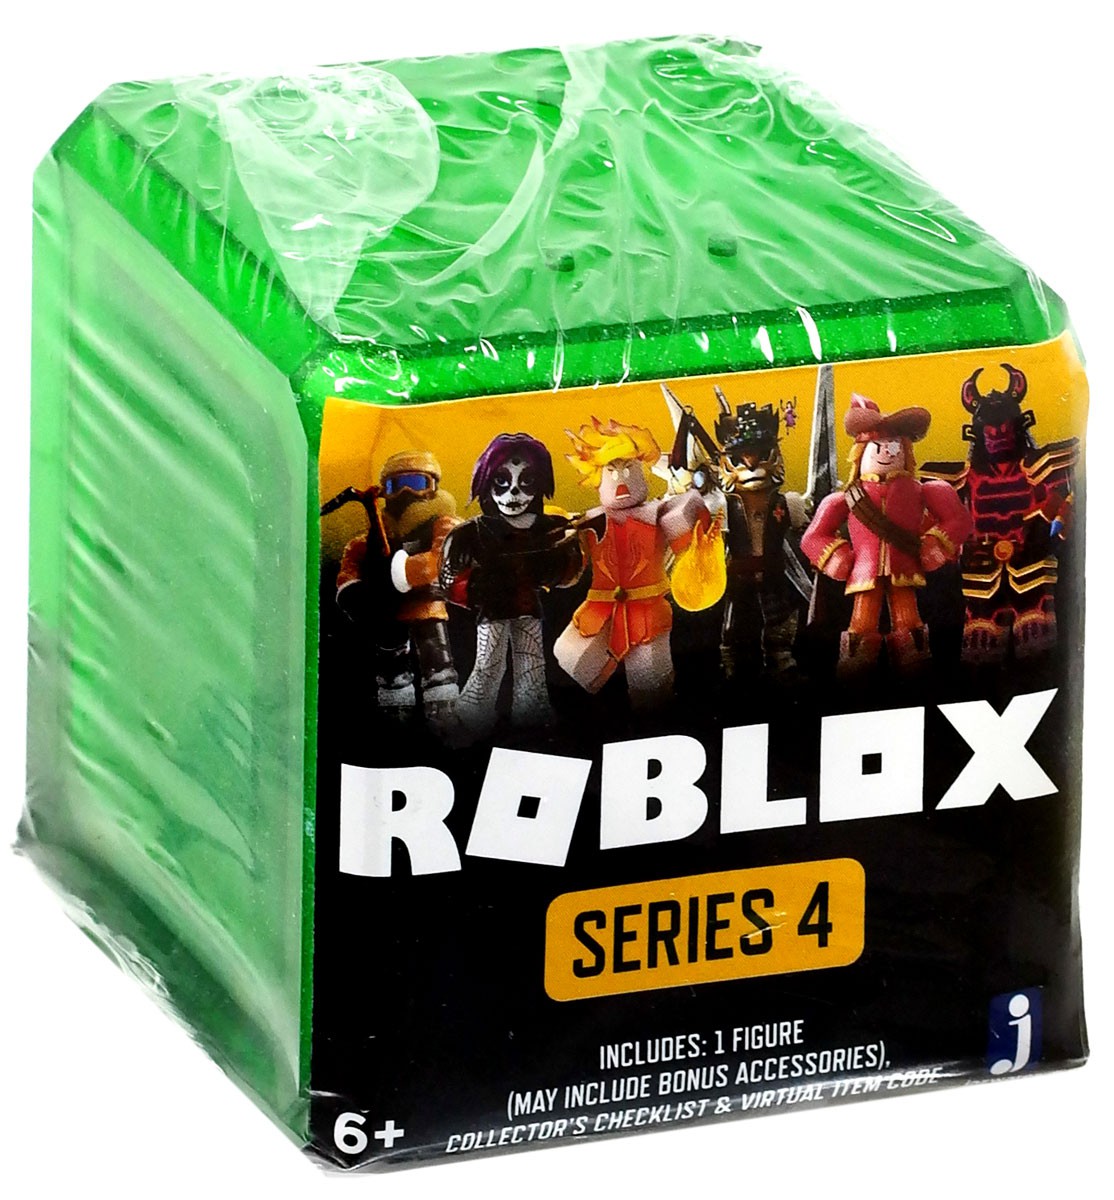 Roblox Celebrity Series 4 Mystery Action Figures Green Box Kids Toys Pack Codes Ebay - rollbox roblox toys gift card codes 2019 series 4